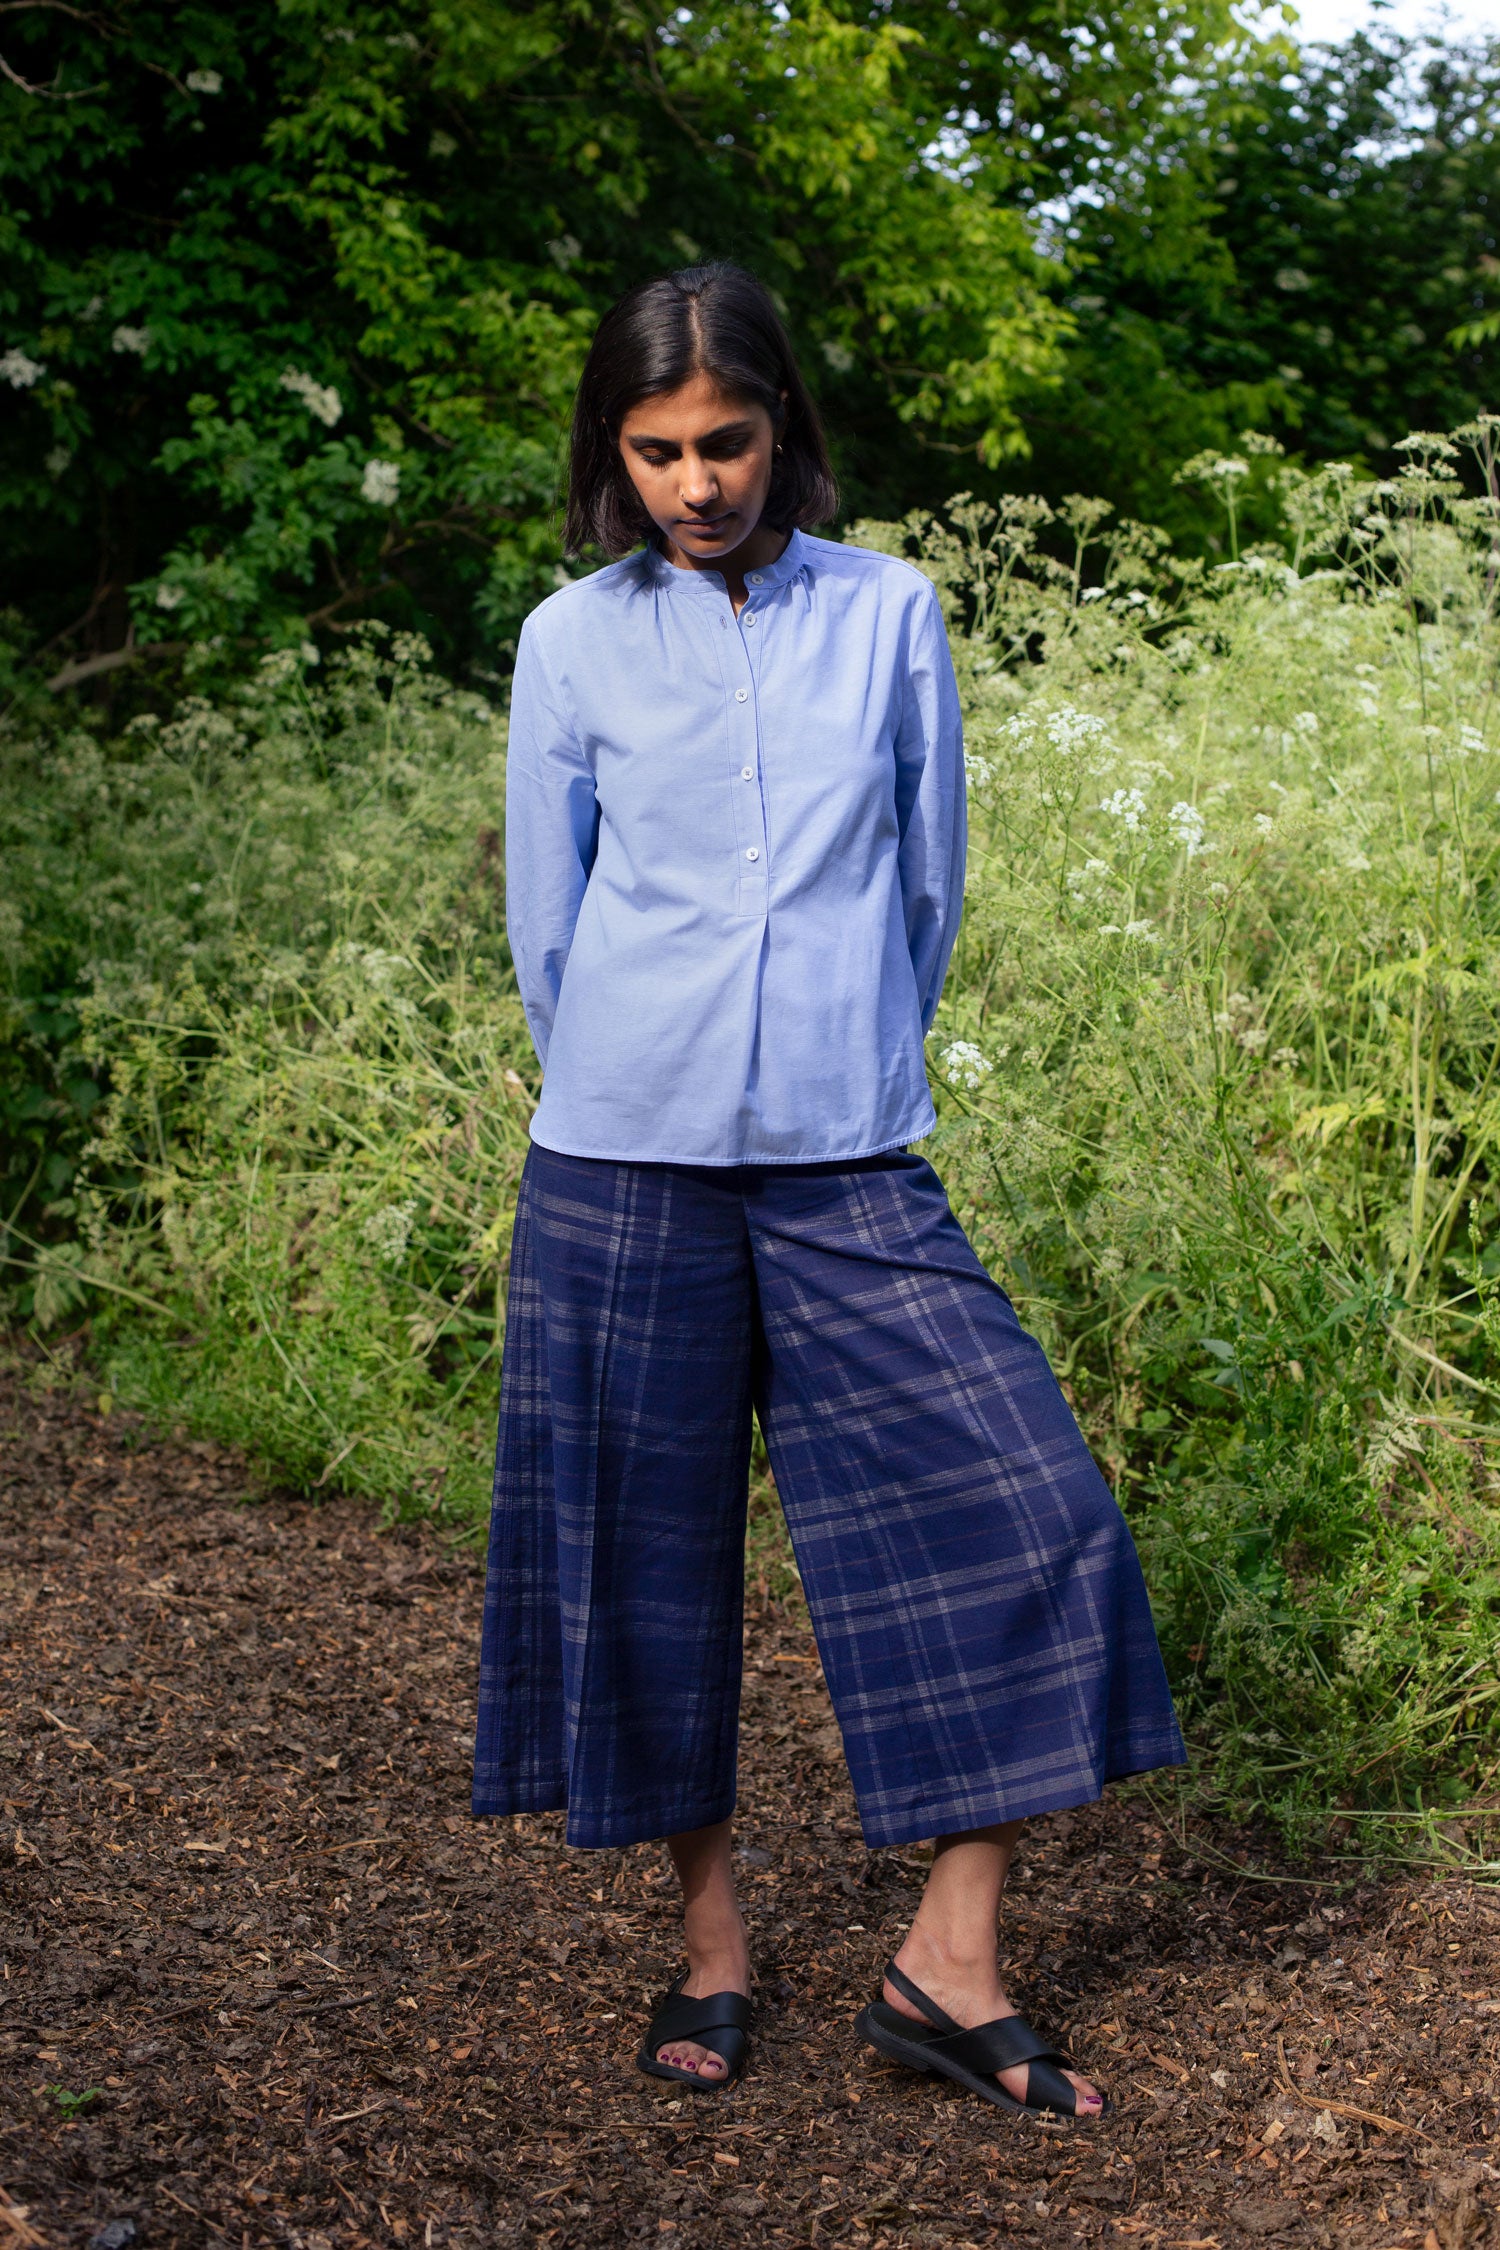 Model stands wearing Saywood's pale blue shirt, the Marie A-Line Blouse, with navy check Amelia wide leg trousers. Hands behind her back and she is surrounded by wild plants and greenery.